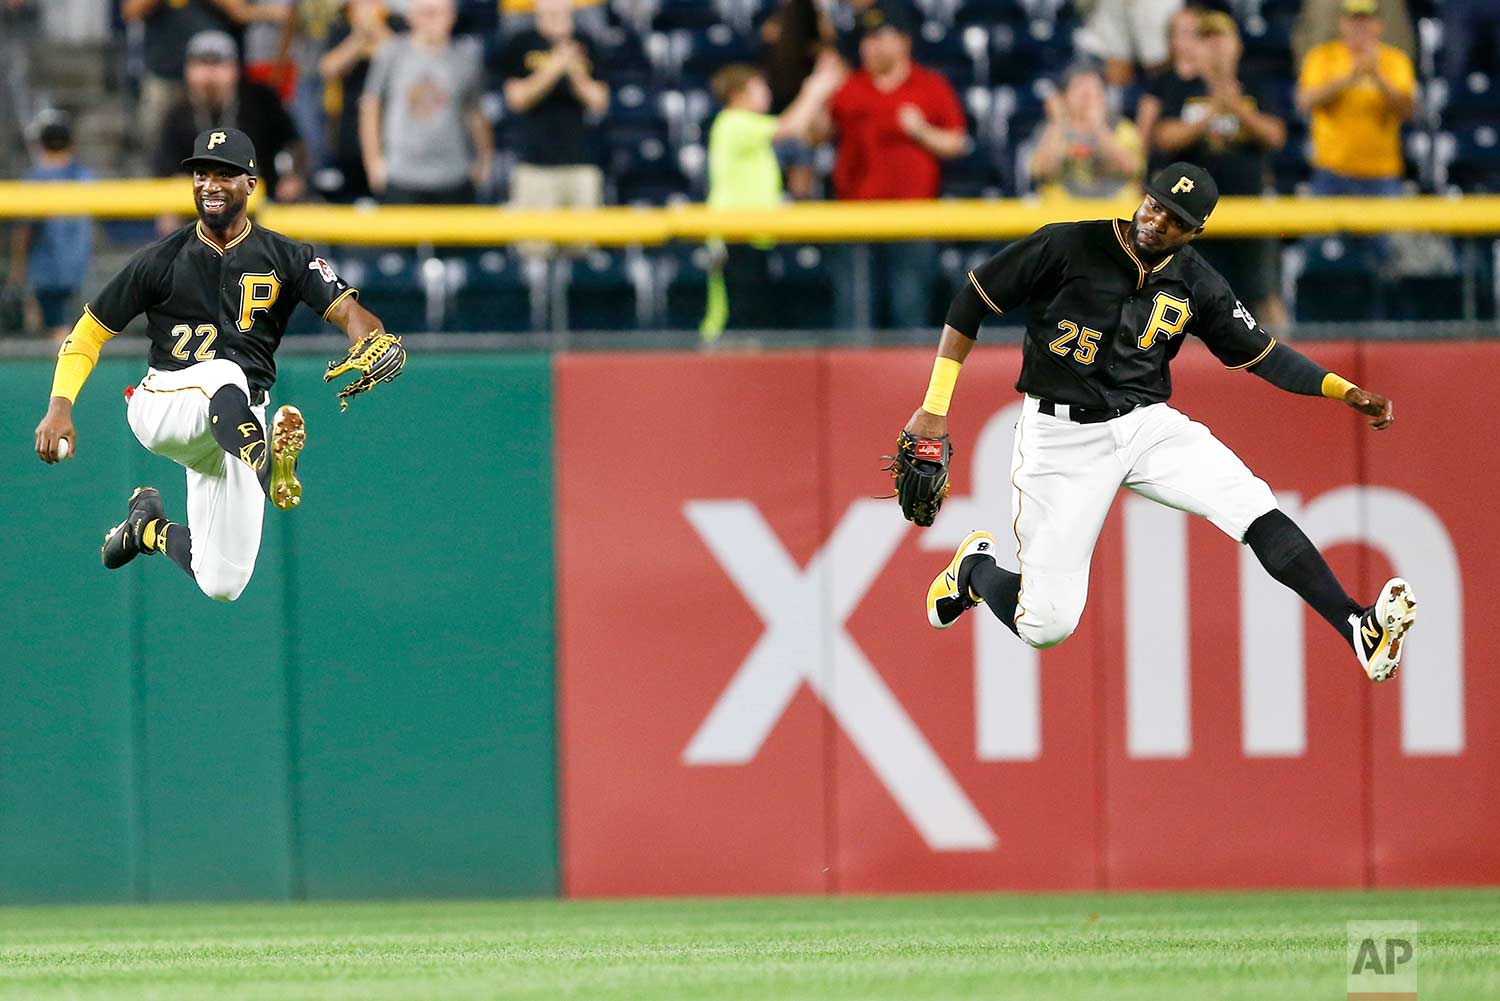  Pittsburgh Pirates center fielder Andrew McCutchen (22) and right fielder Gregory Polanco (25) leap in celebration after the Pirates defeated the Baltimore Orioles 5-3 in a baseball game, Wednesday, Sept. 27, 2017, in Pittsburgh. (AP Photo/Keith Sra